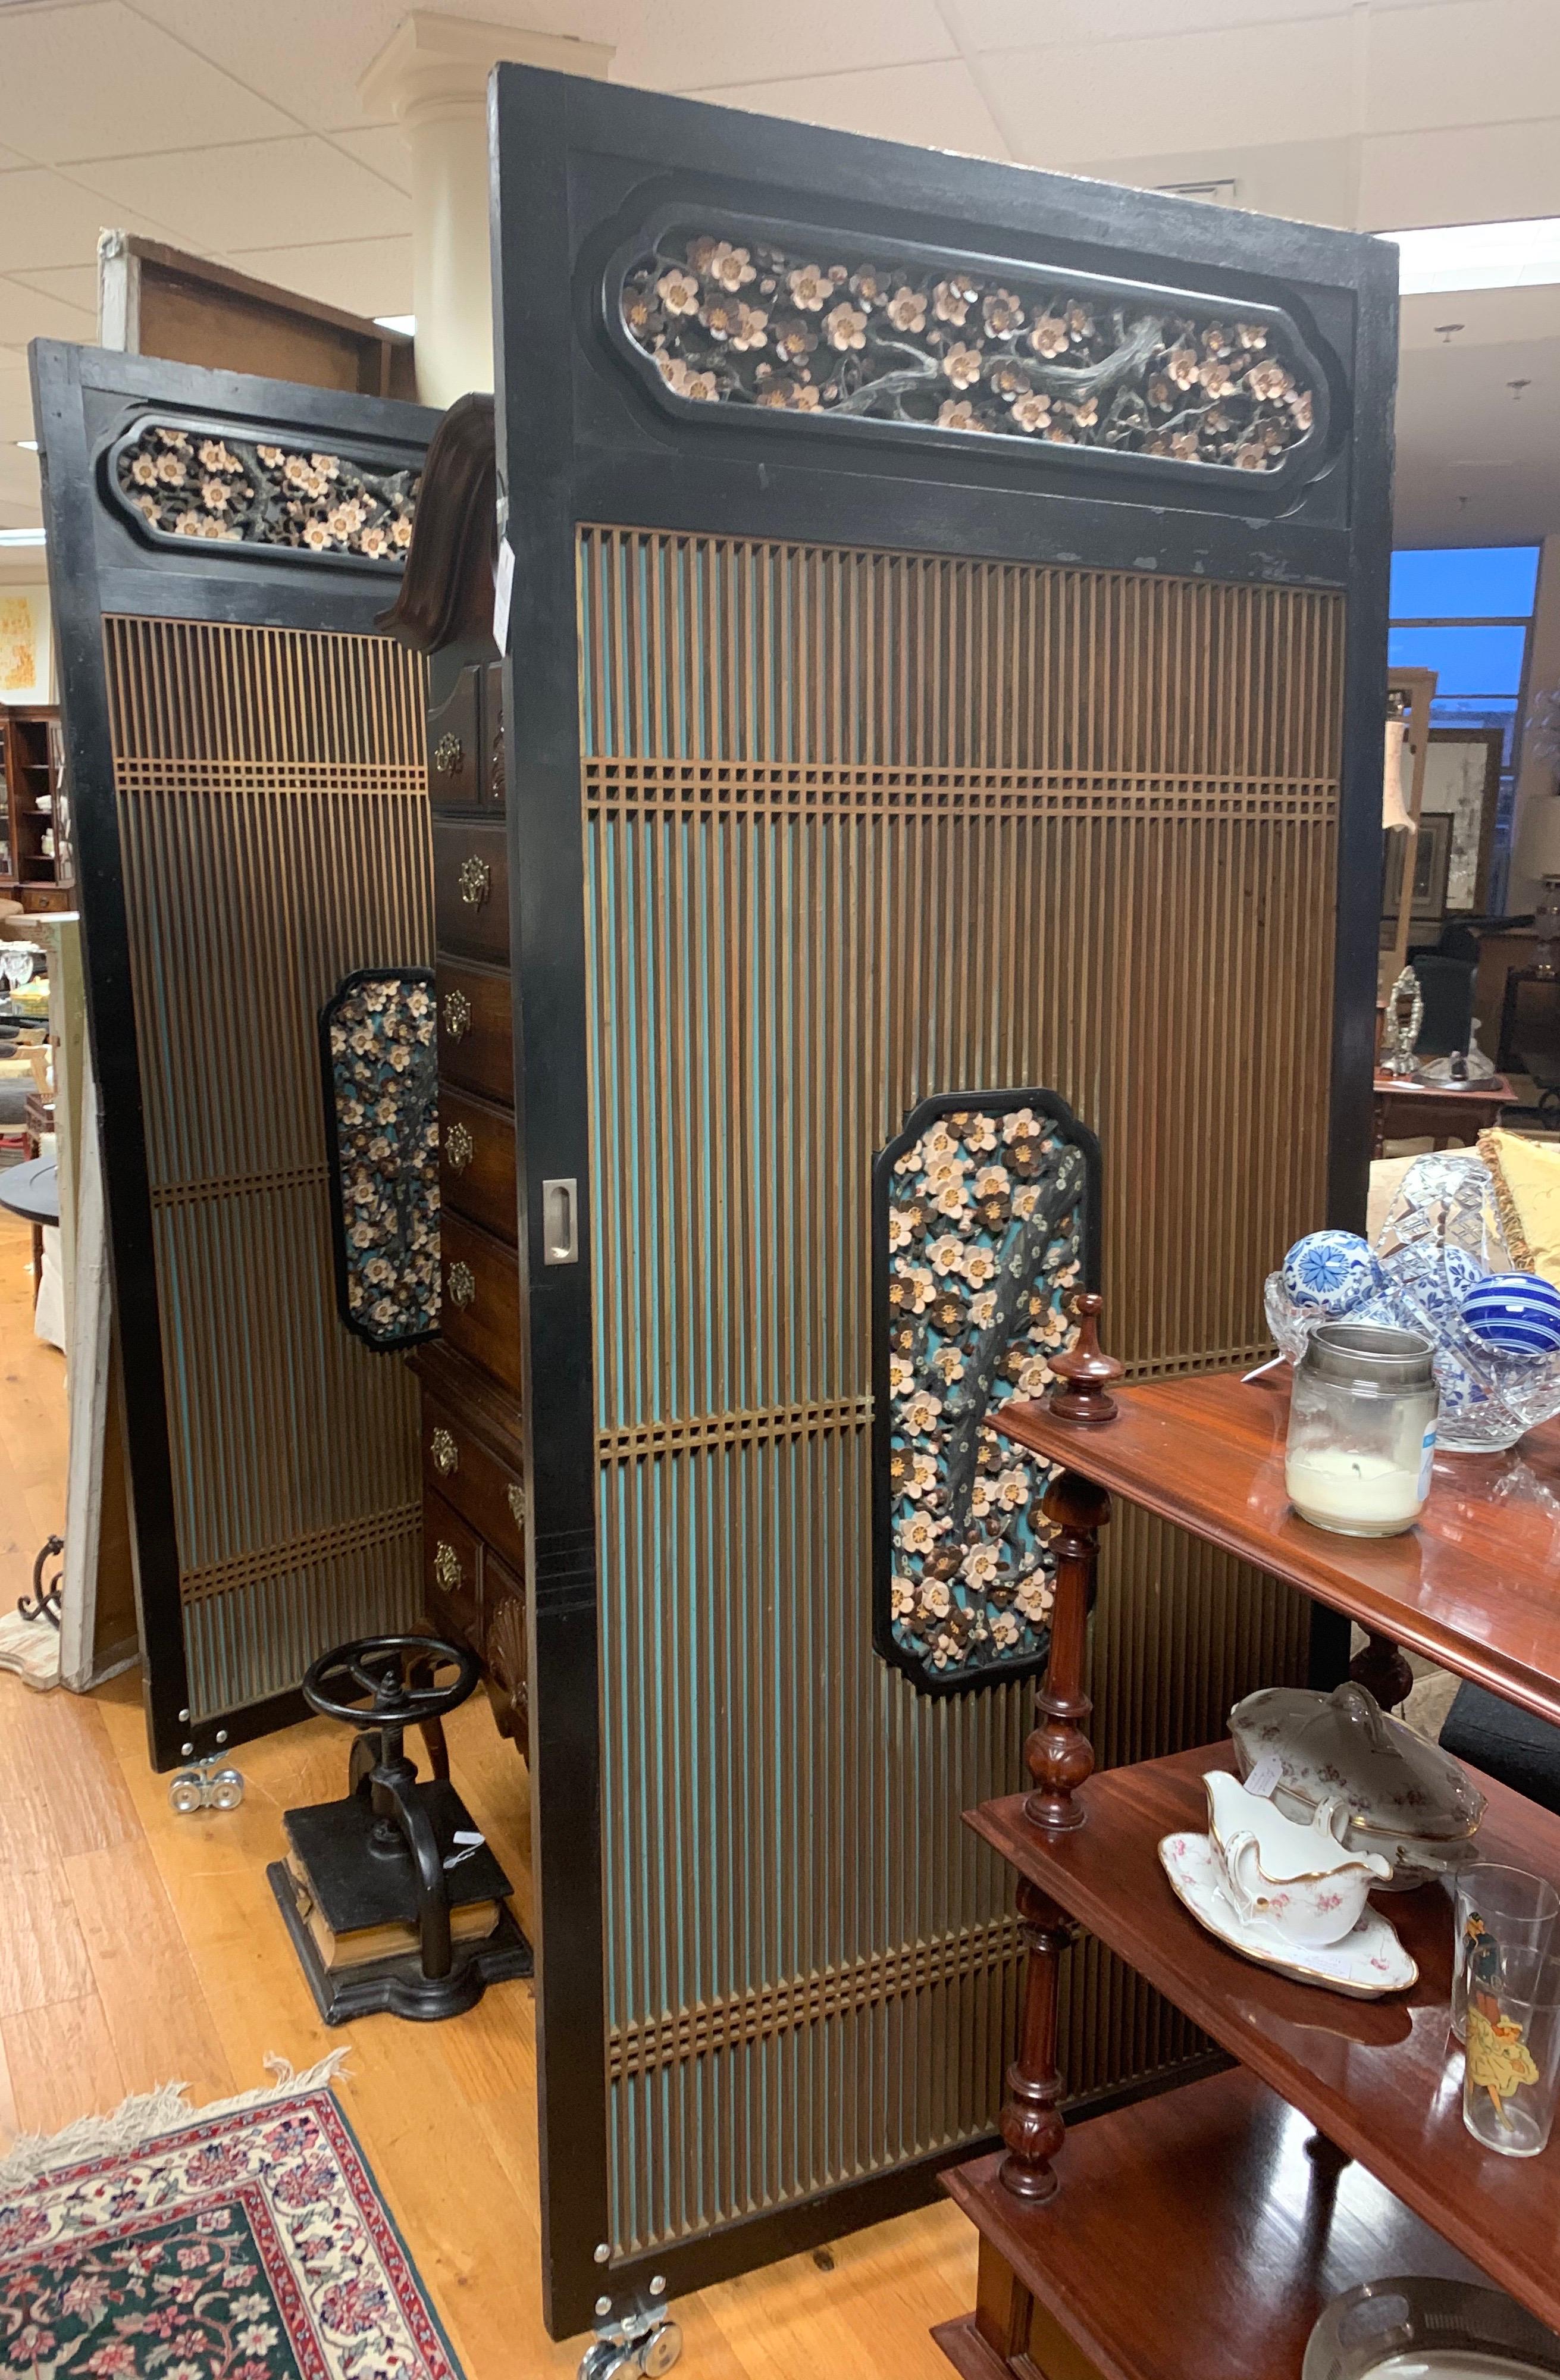 Stunning pair of custom made Japanese Shoji laquered sliding doors with casters on bottom for ease of opening and closing. From a Darien, CT architectural gem, this is not your run of the mill sliding barn door set.
Please look closely at intricate